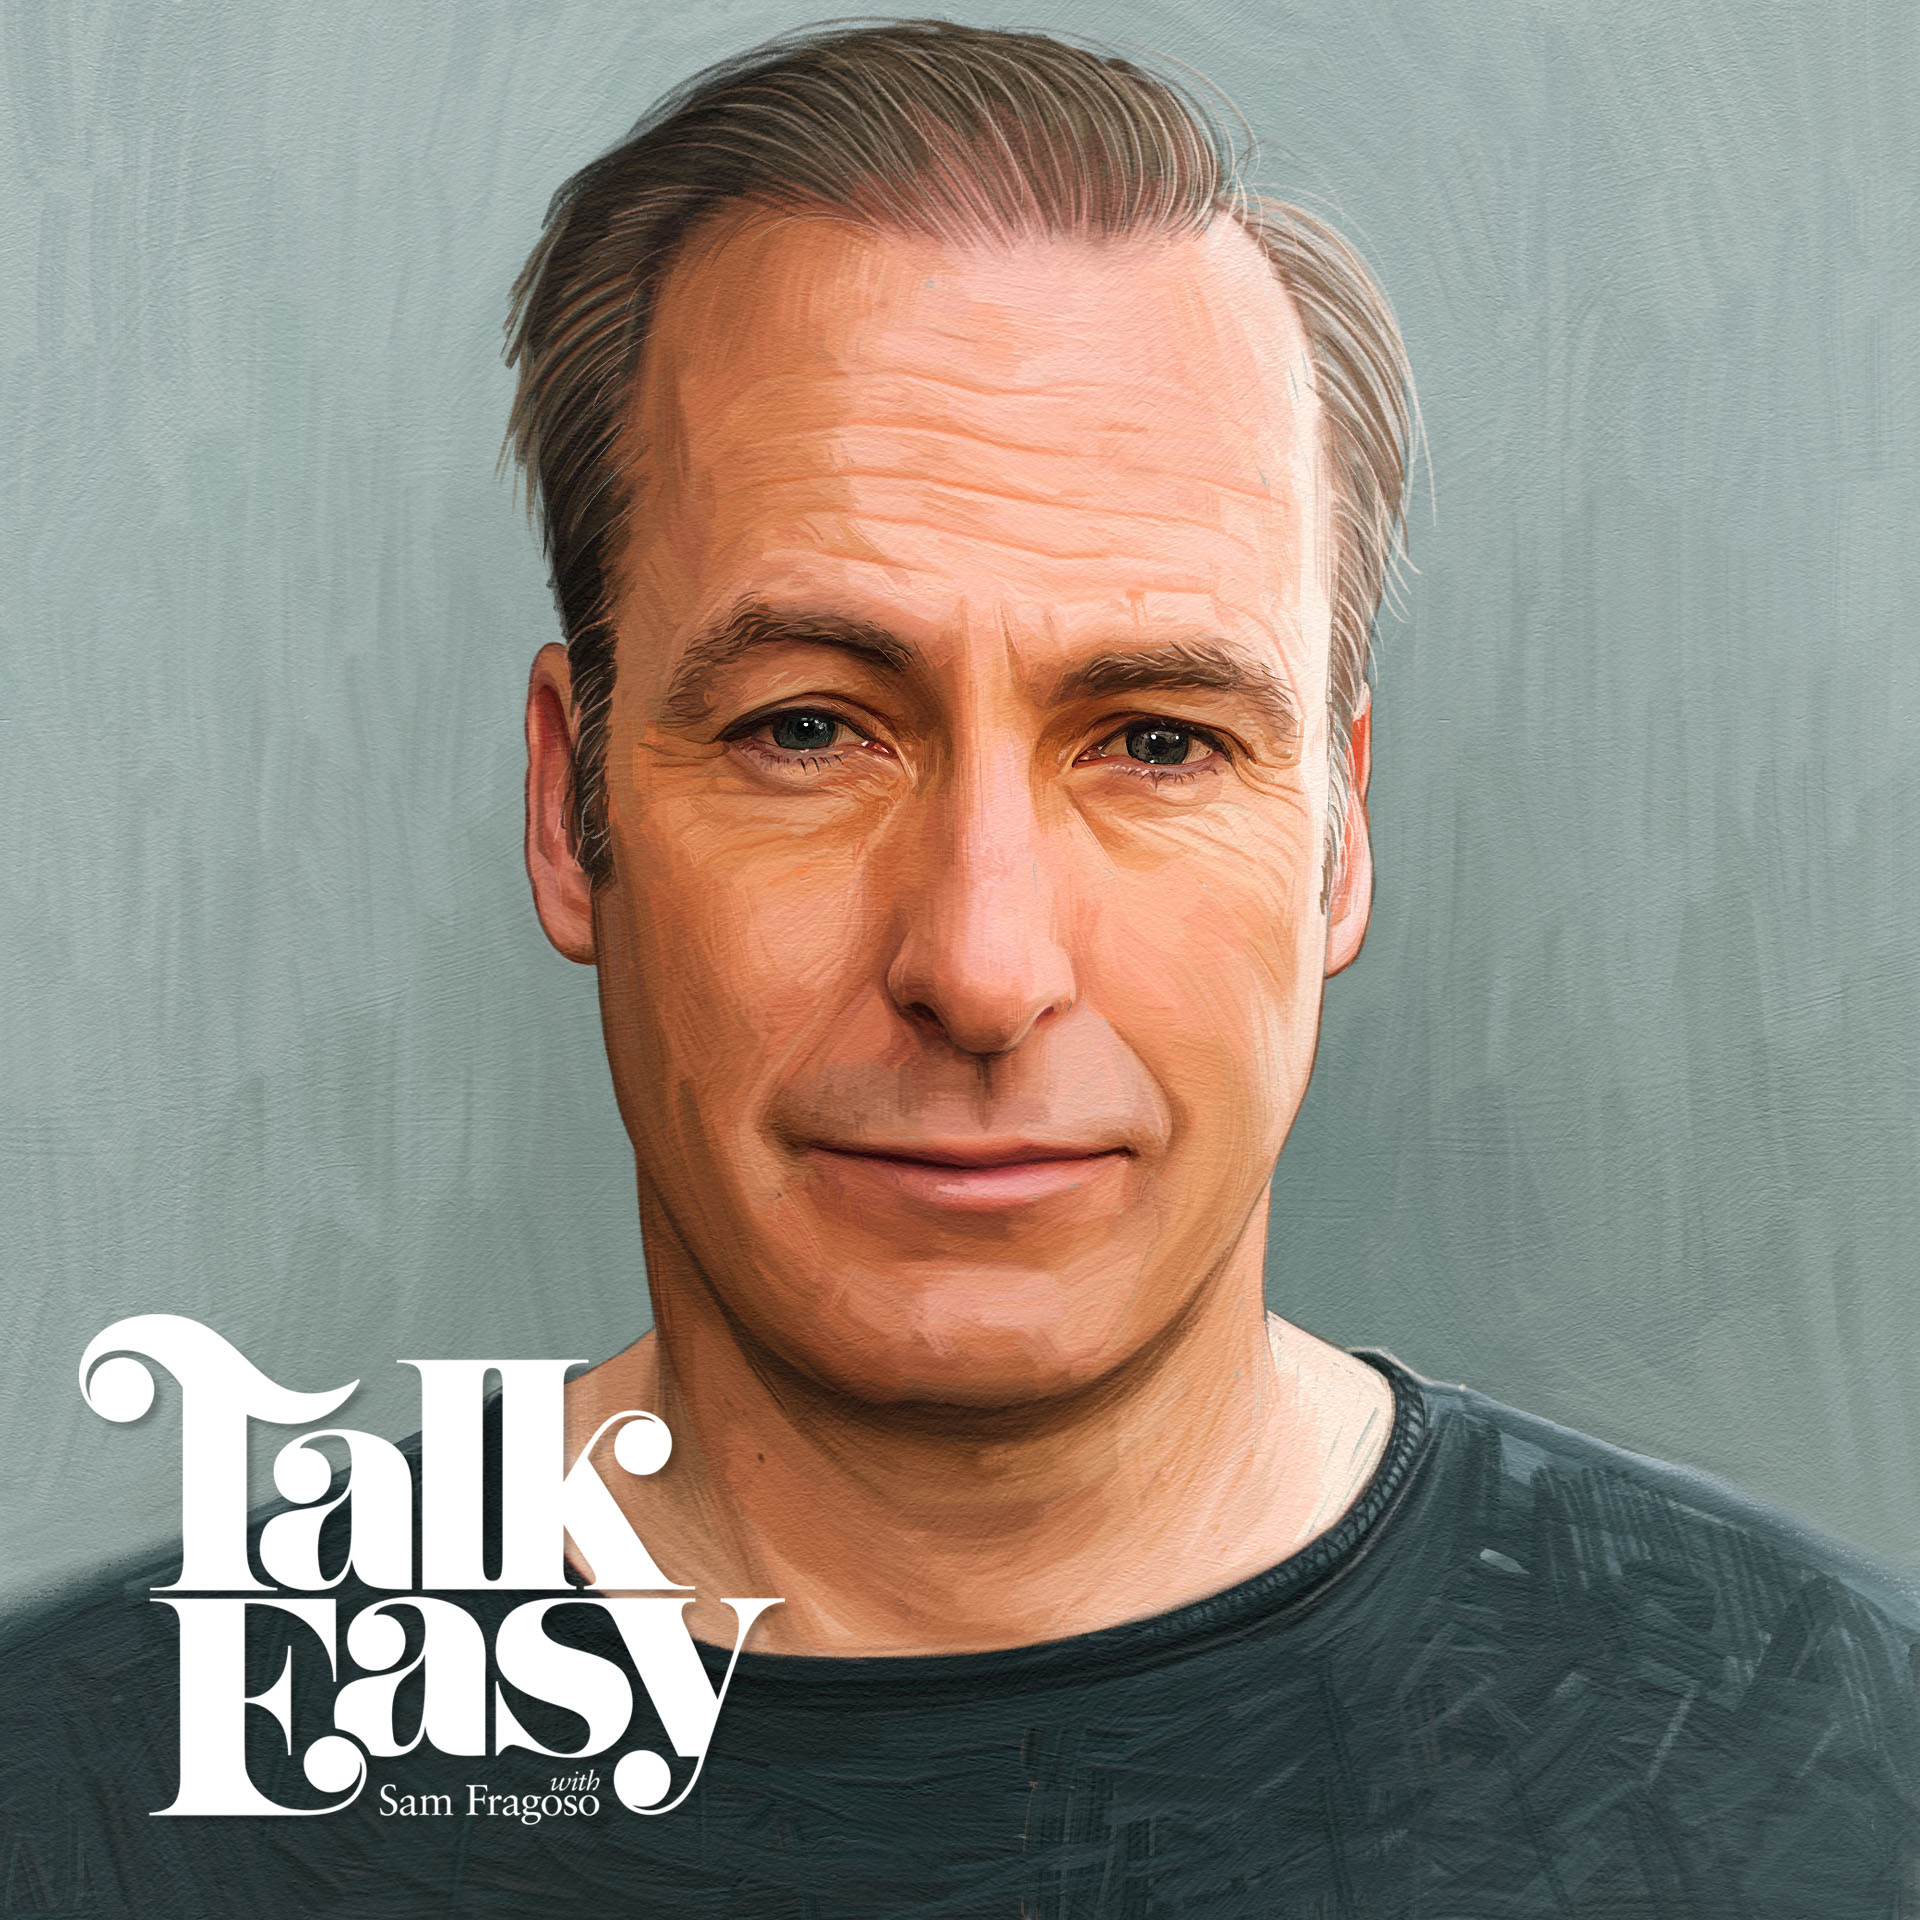 Actor Bob Odenkirk: The King of (Dark) Comedy